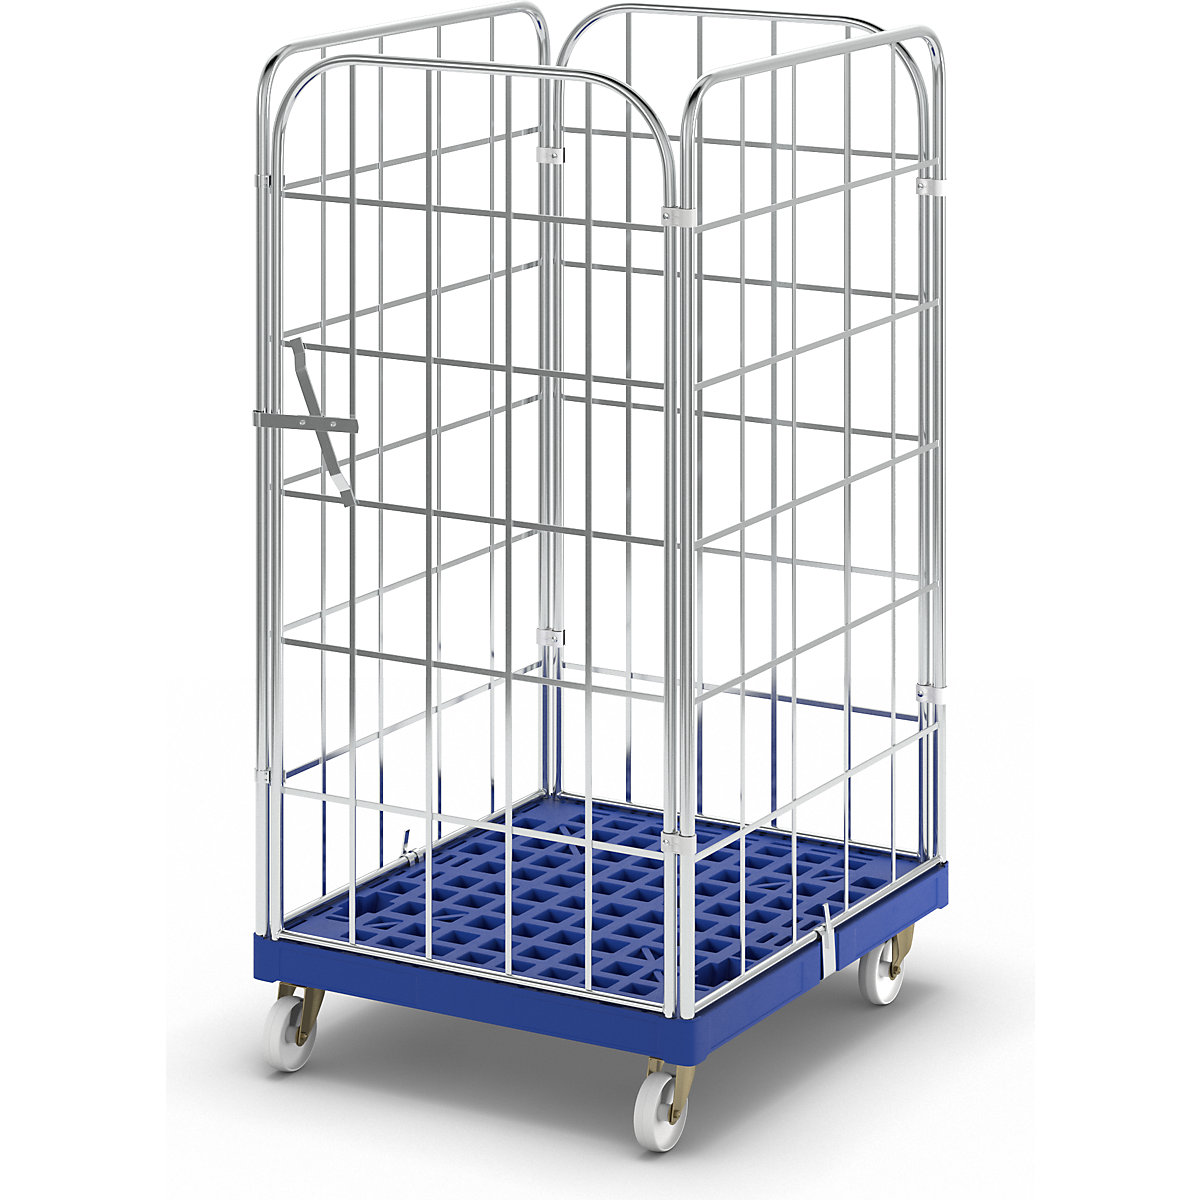 Roll container with plastic dolly, 4 sided, WxD 724 x 815 mm, single piece front panel, effective height 1460 mm-1